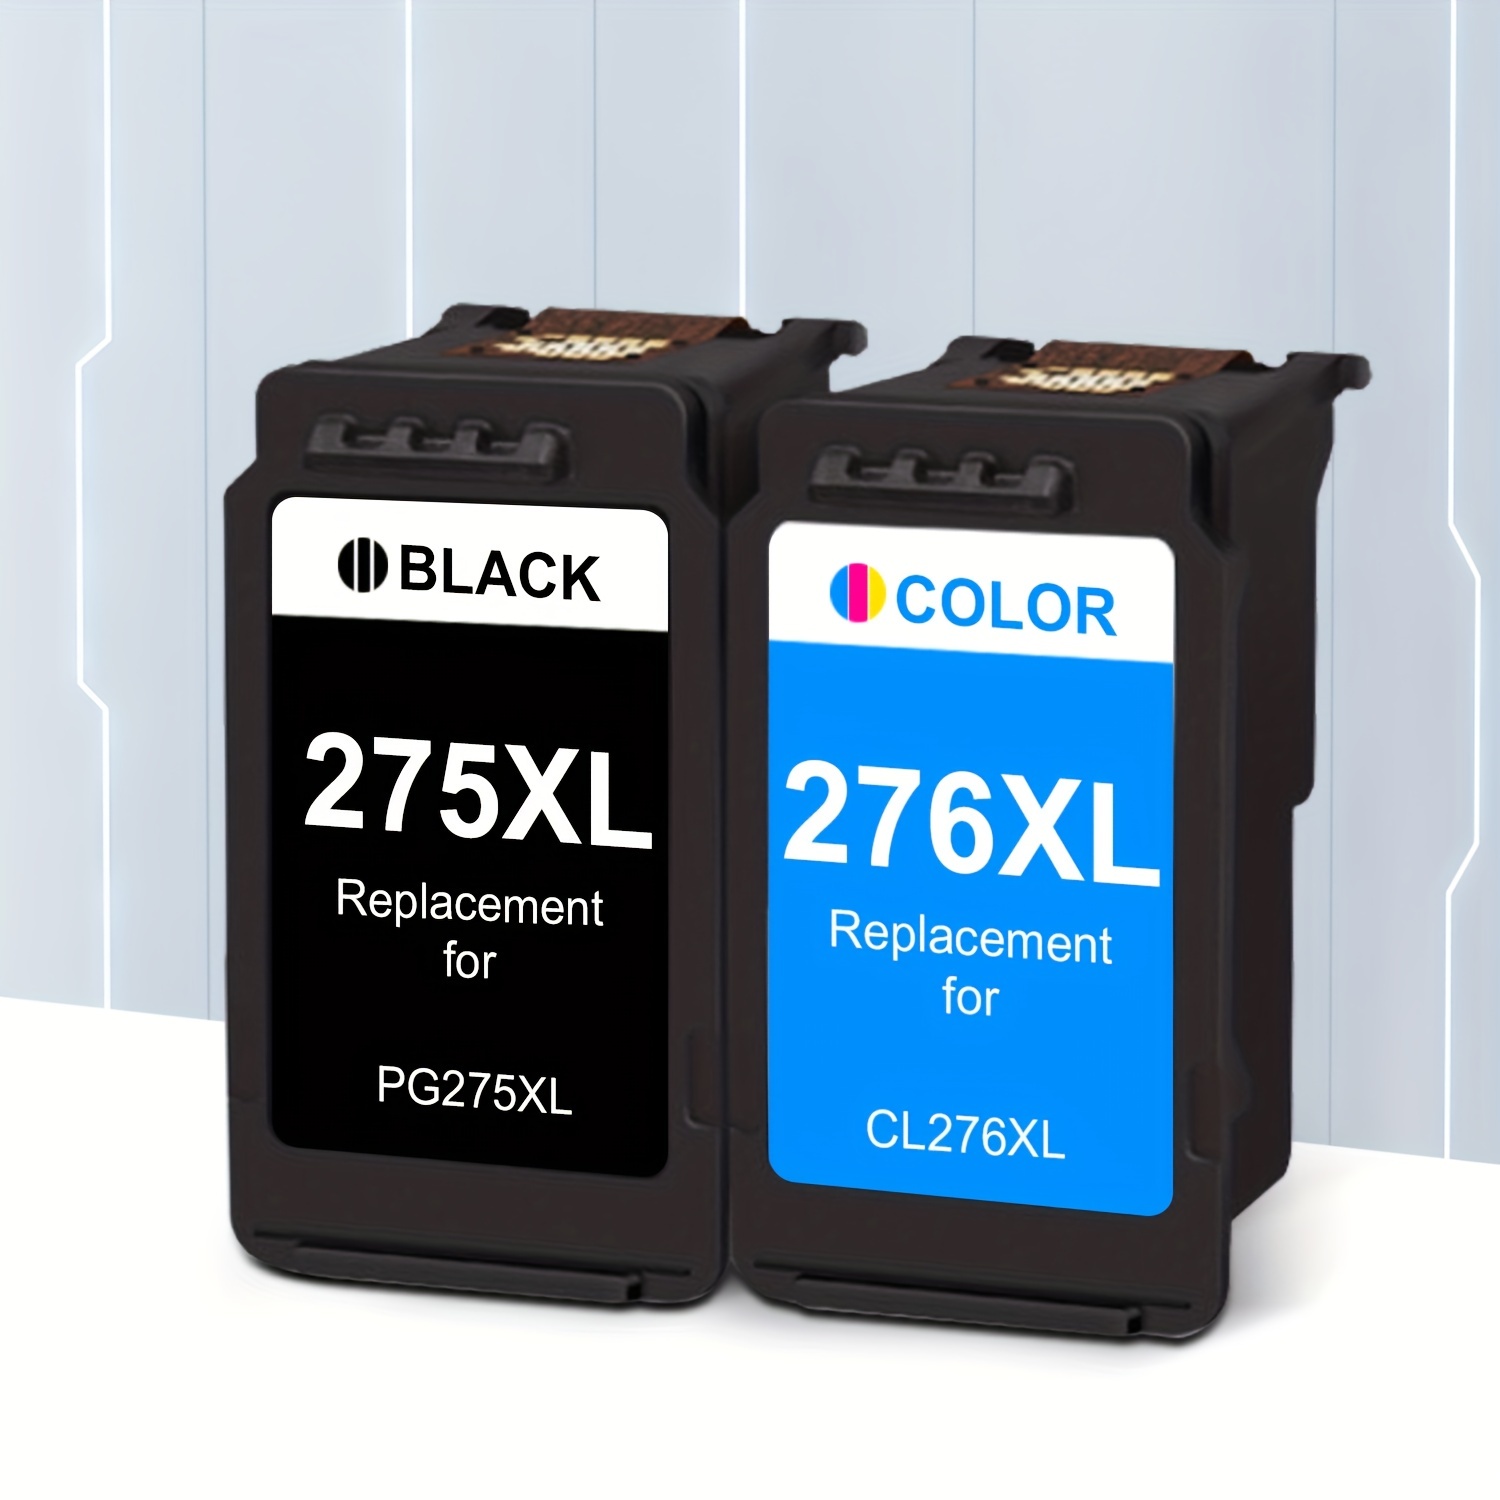 Canon Multicolor Ink for Printer PG-275 XL / CL-276 XL Compatible to PIXMA  TS3520, TS3522 and TR4720 Printers